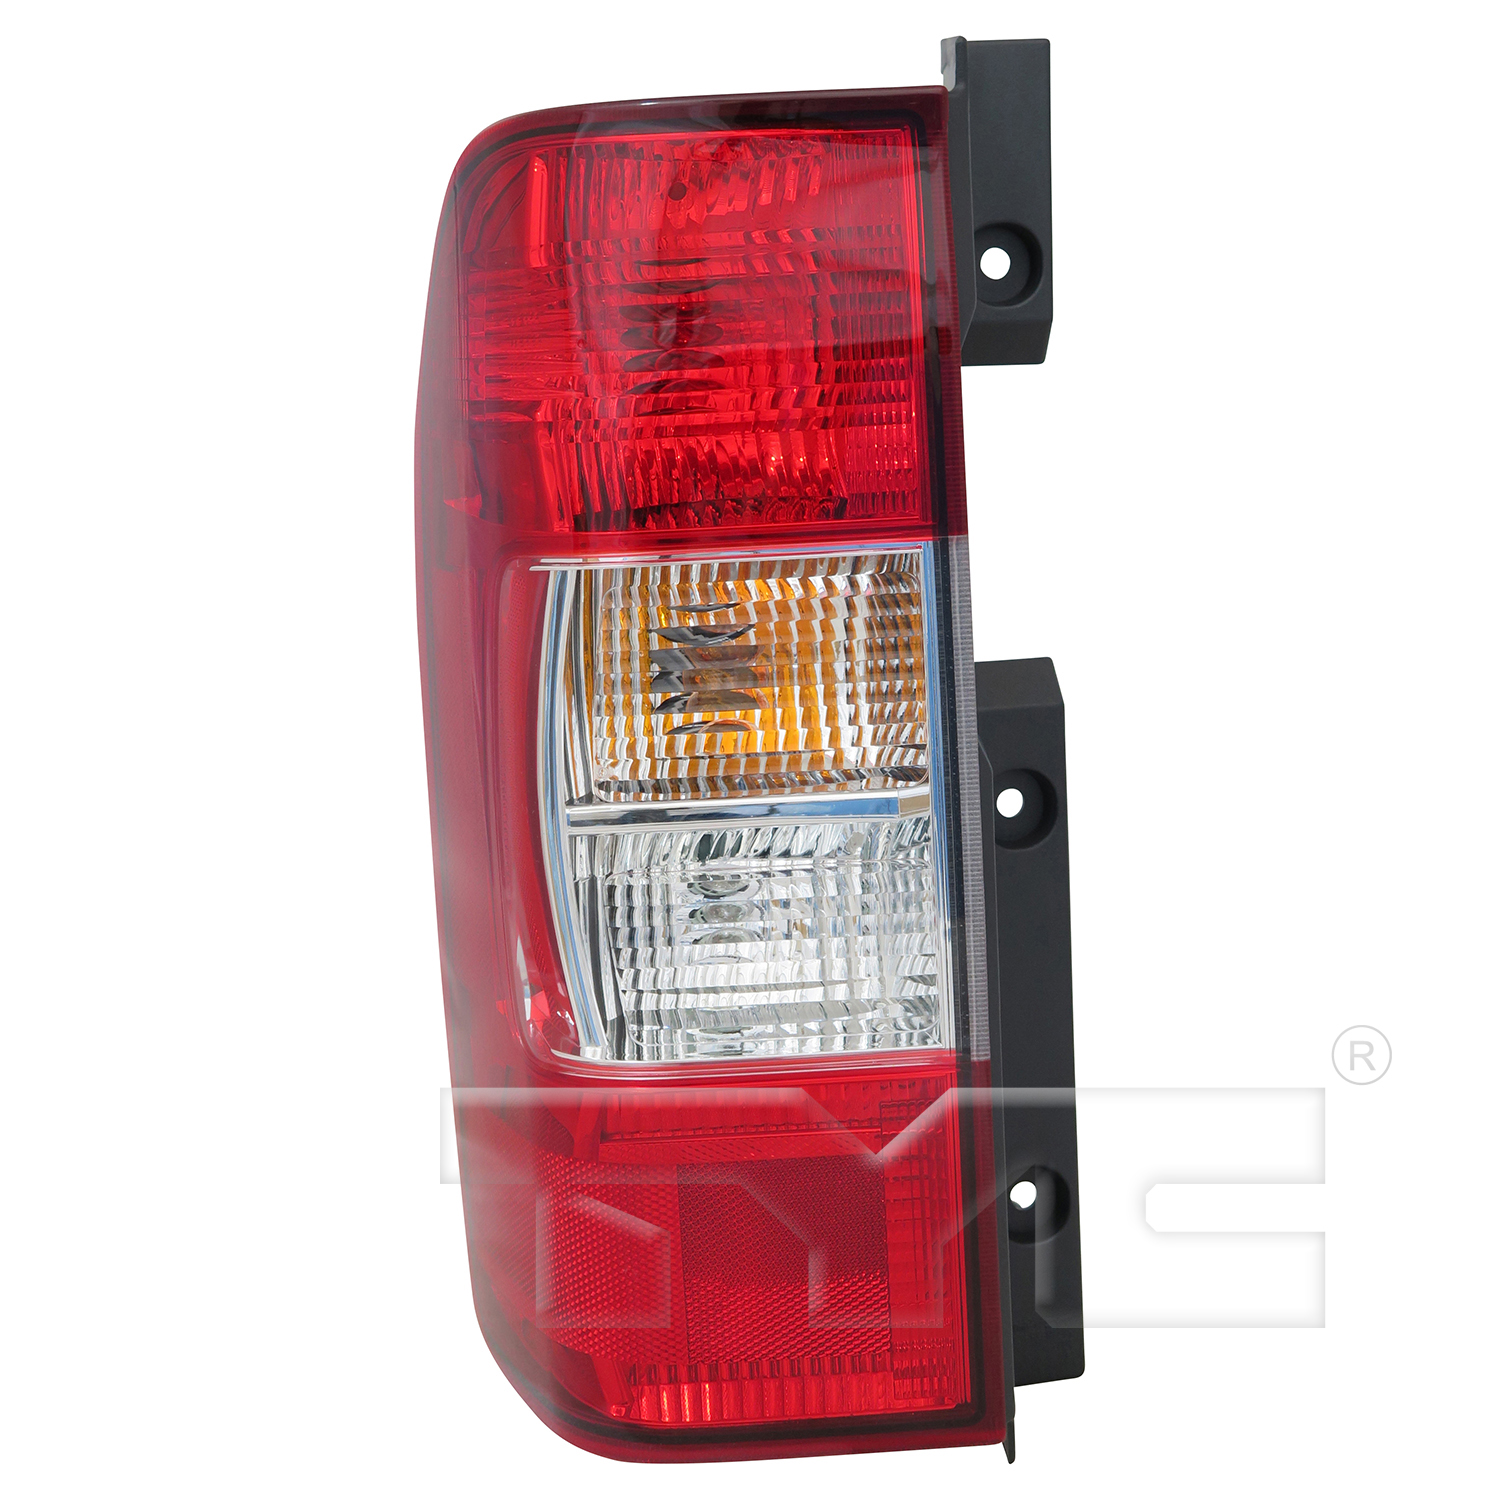 Aftermarket TAILLIGHTS for NISSAN - NV2500, NV2500,12-21,LT Taillamp assy